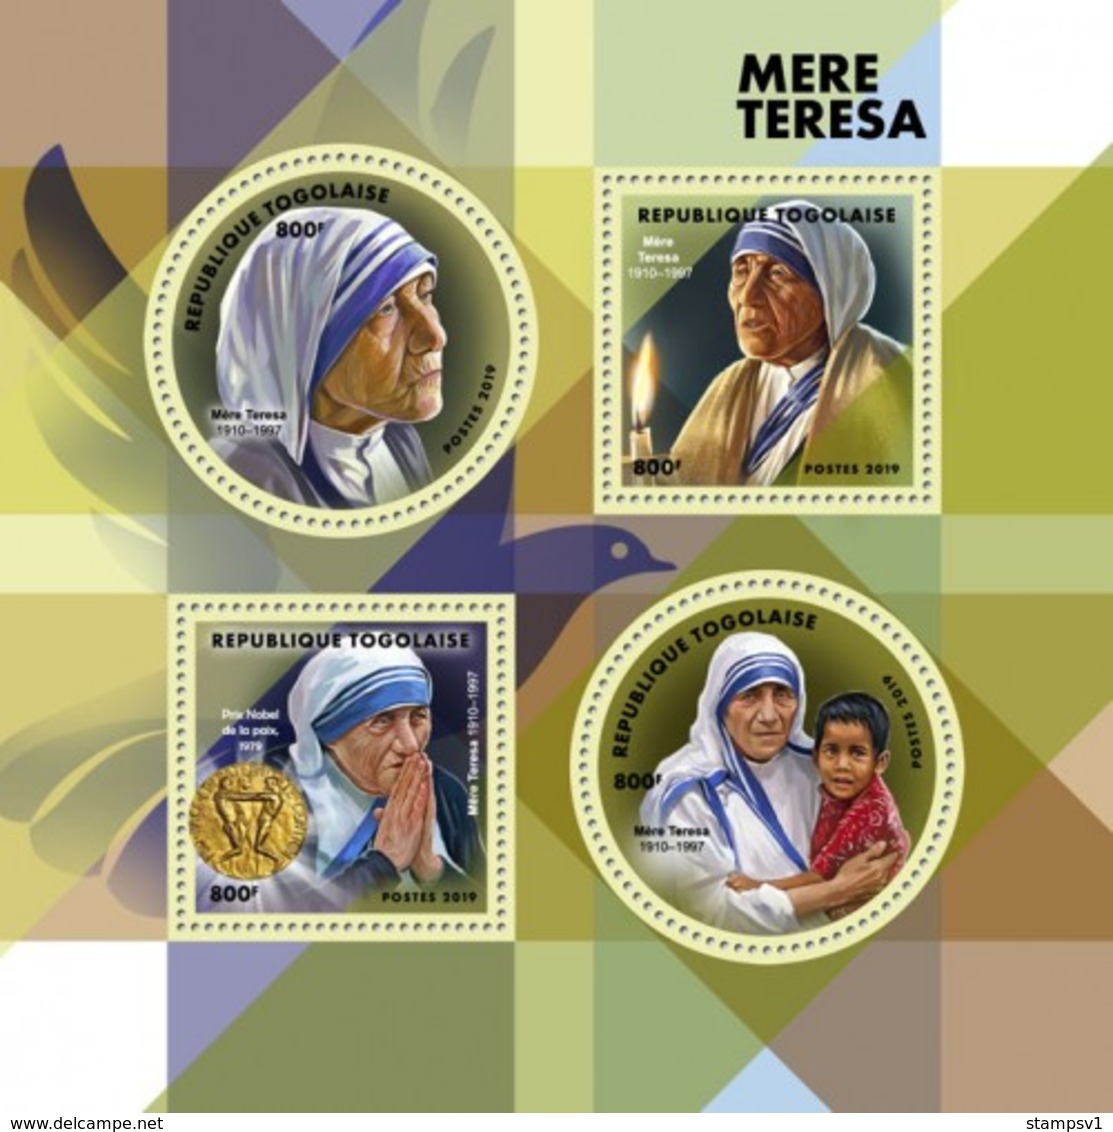 Togo. 2019 Mother Teresa. (0158a)  OFFICIAL ISSUE - Mother Teresa